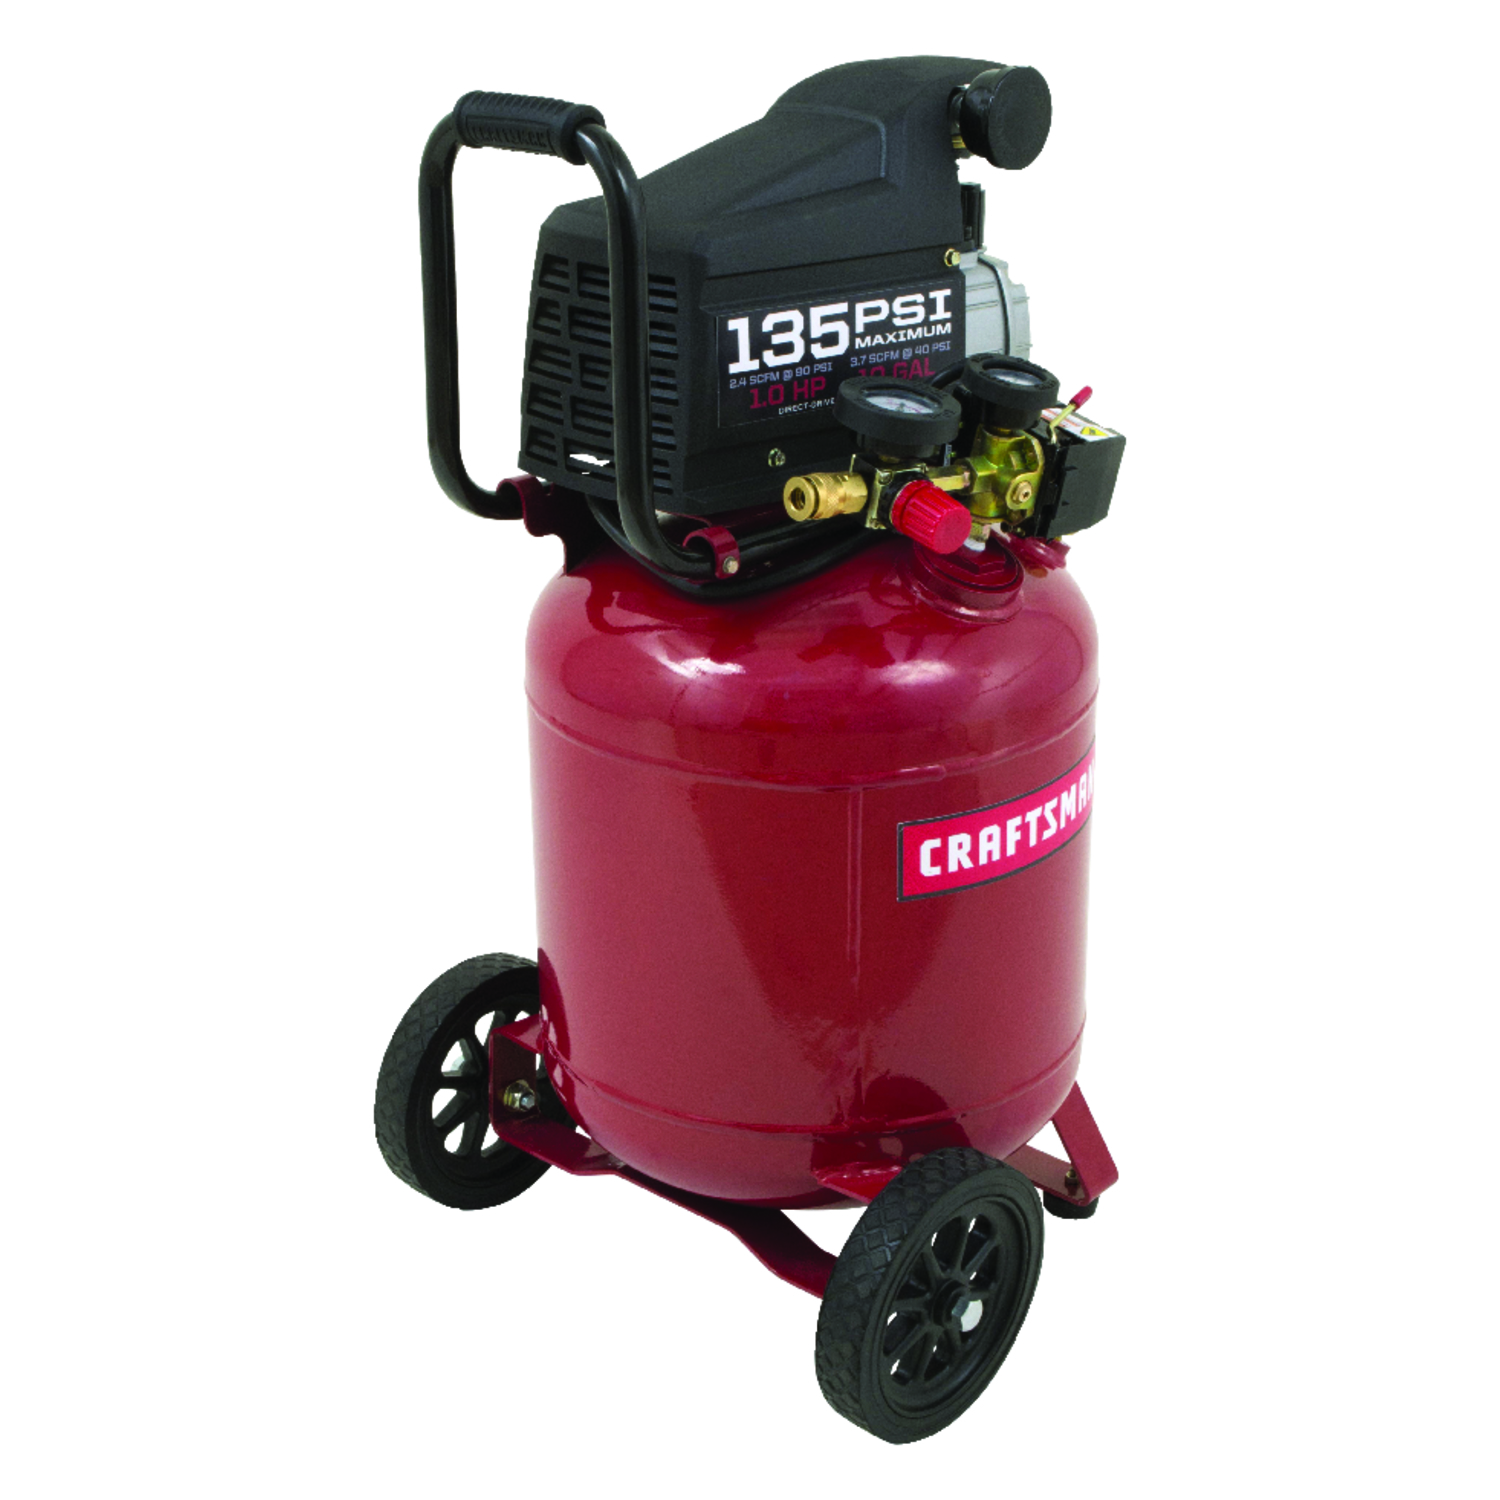 UPC 846212008287 product image for Craftsman 10 Gallon Vertical Air Compressors With Inflation Blow Gun (00916923) | upcitemdb.com